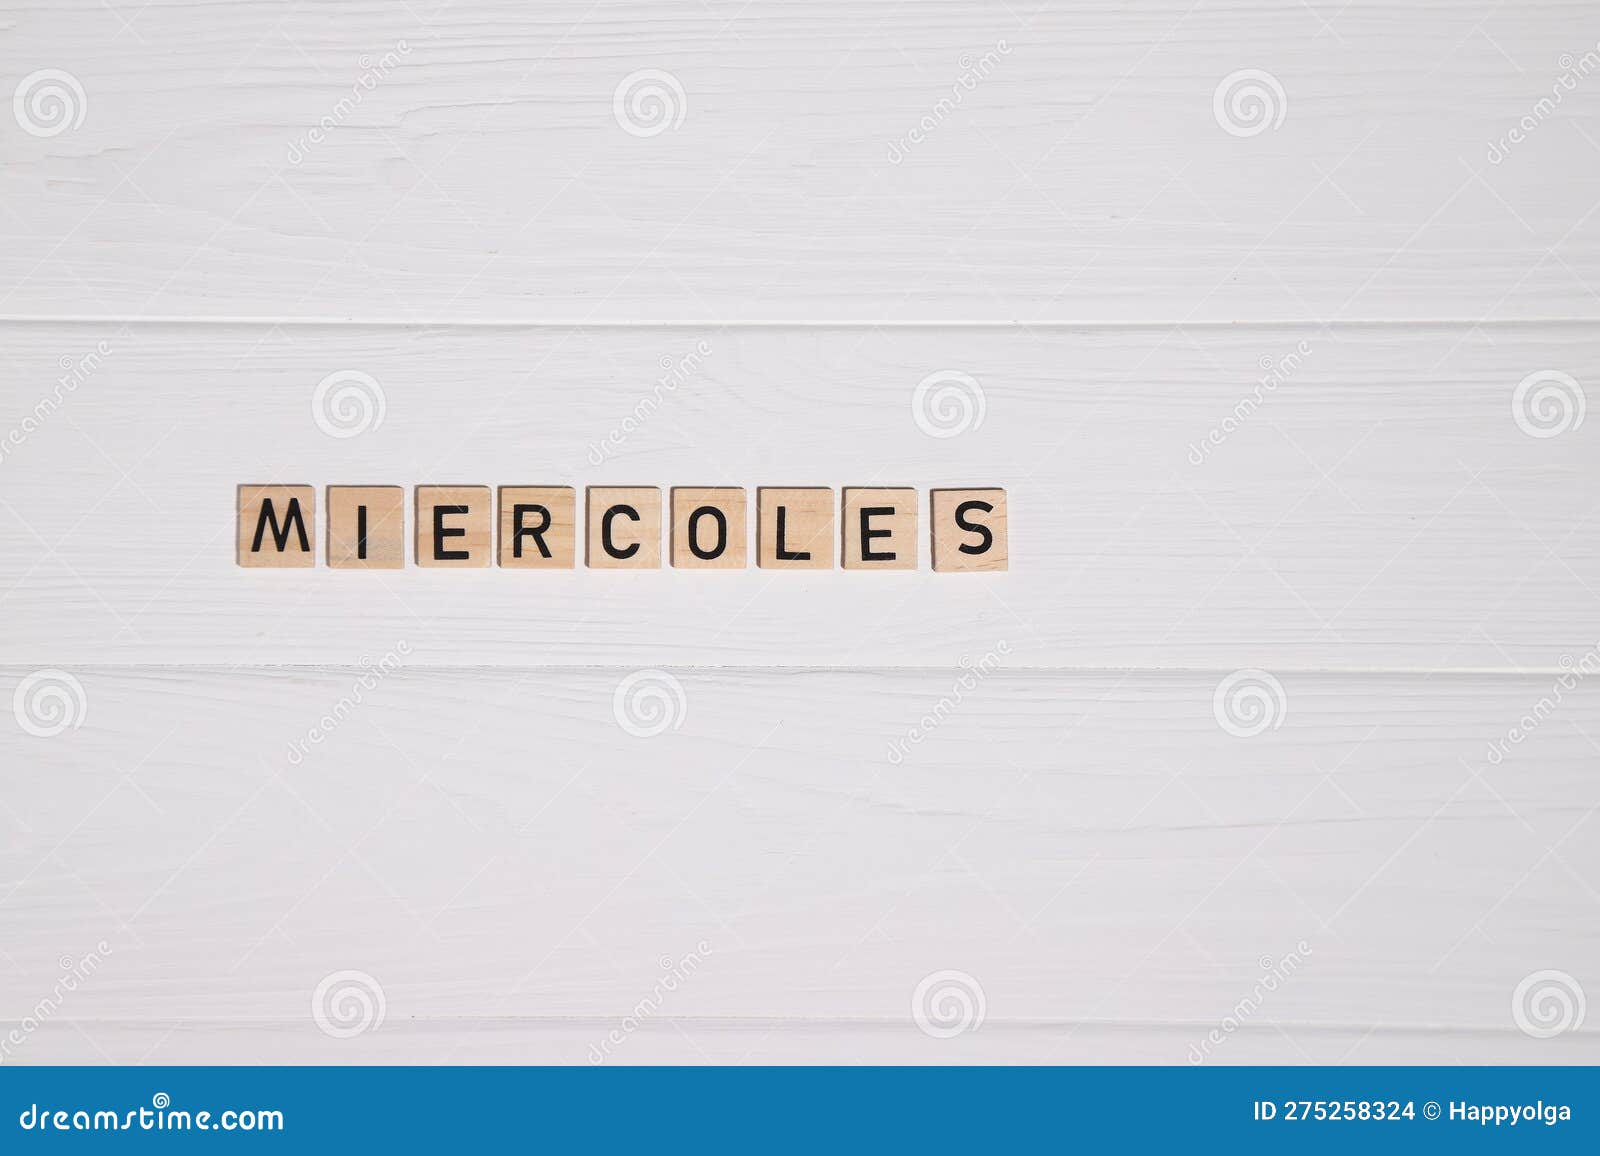 miercoles week day name on white wooden background